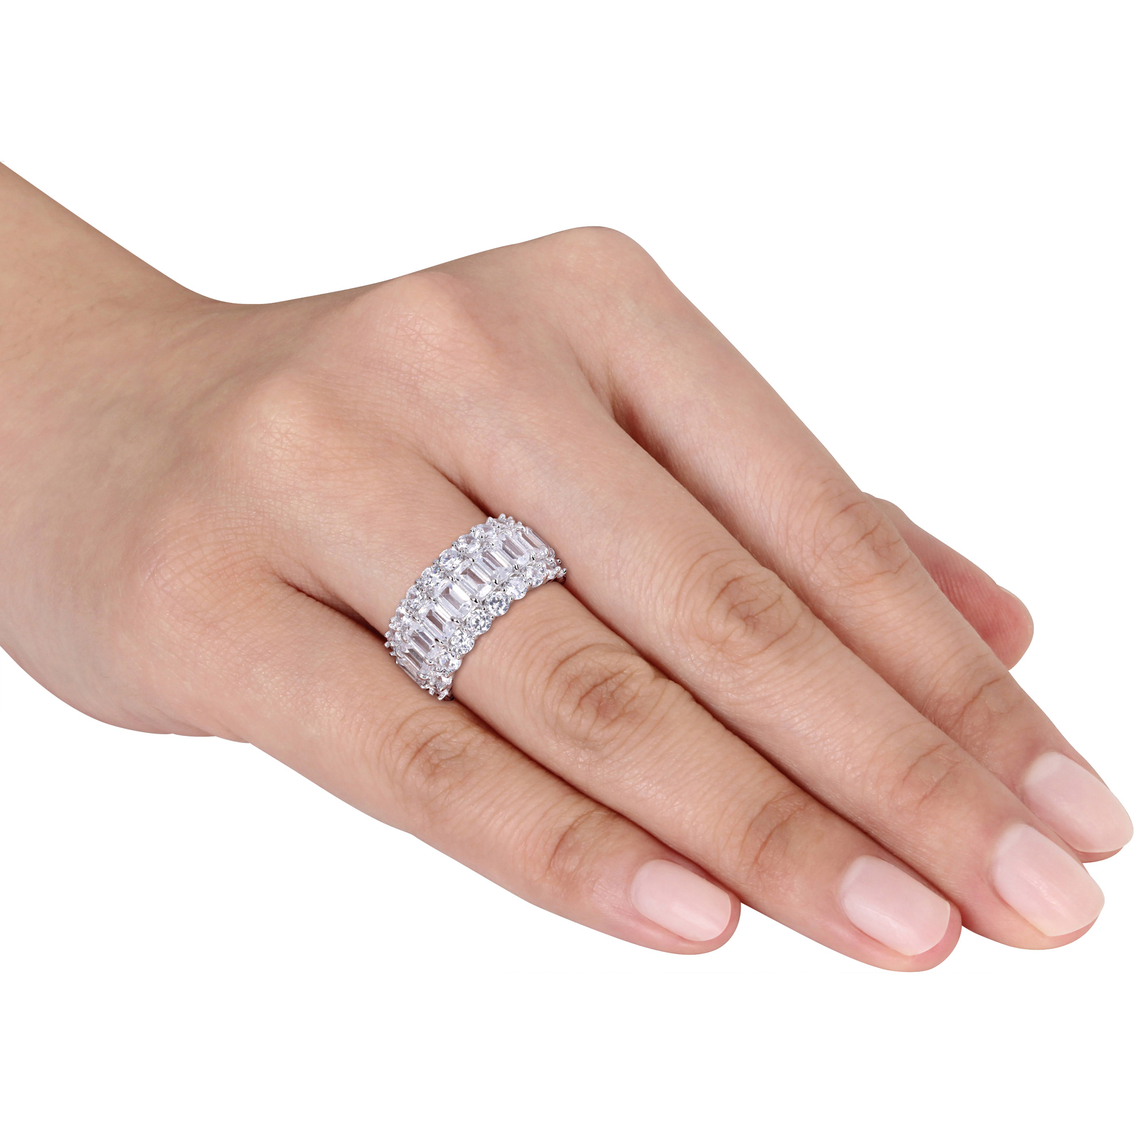 Sofia B. Sterling Silver Cubic Zirconia Eternity Band - Image 4 of 4